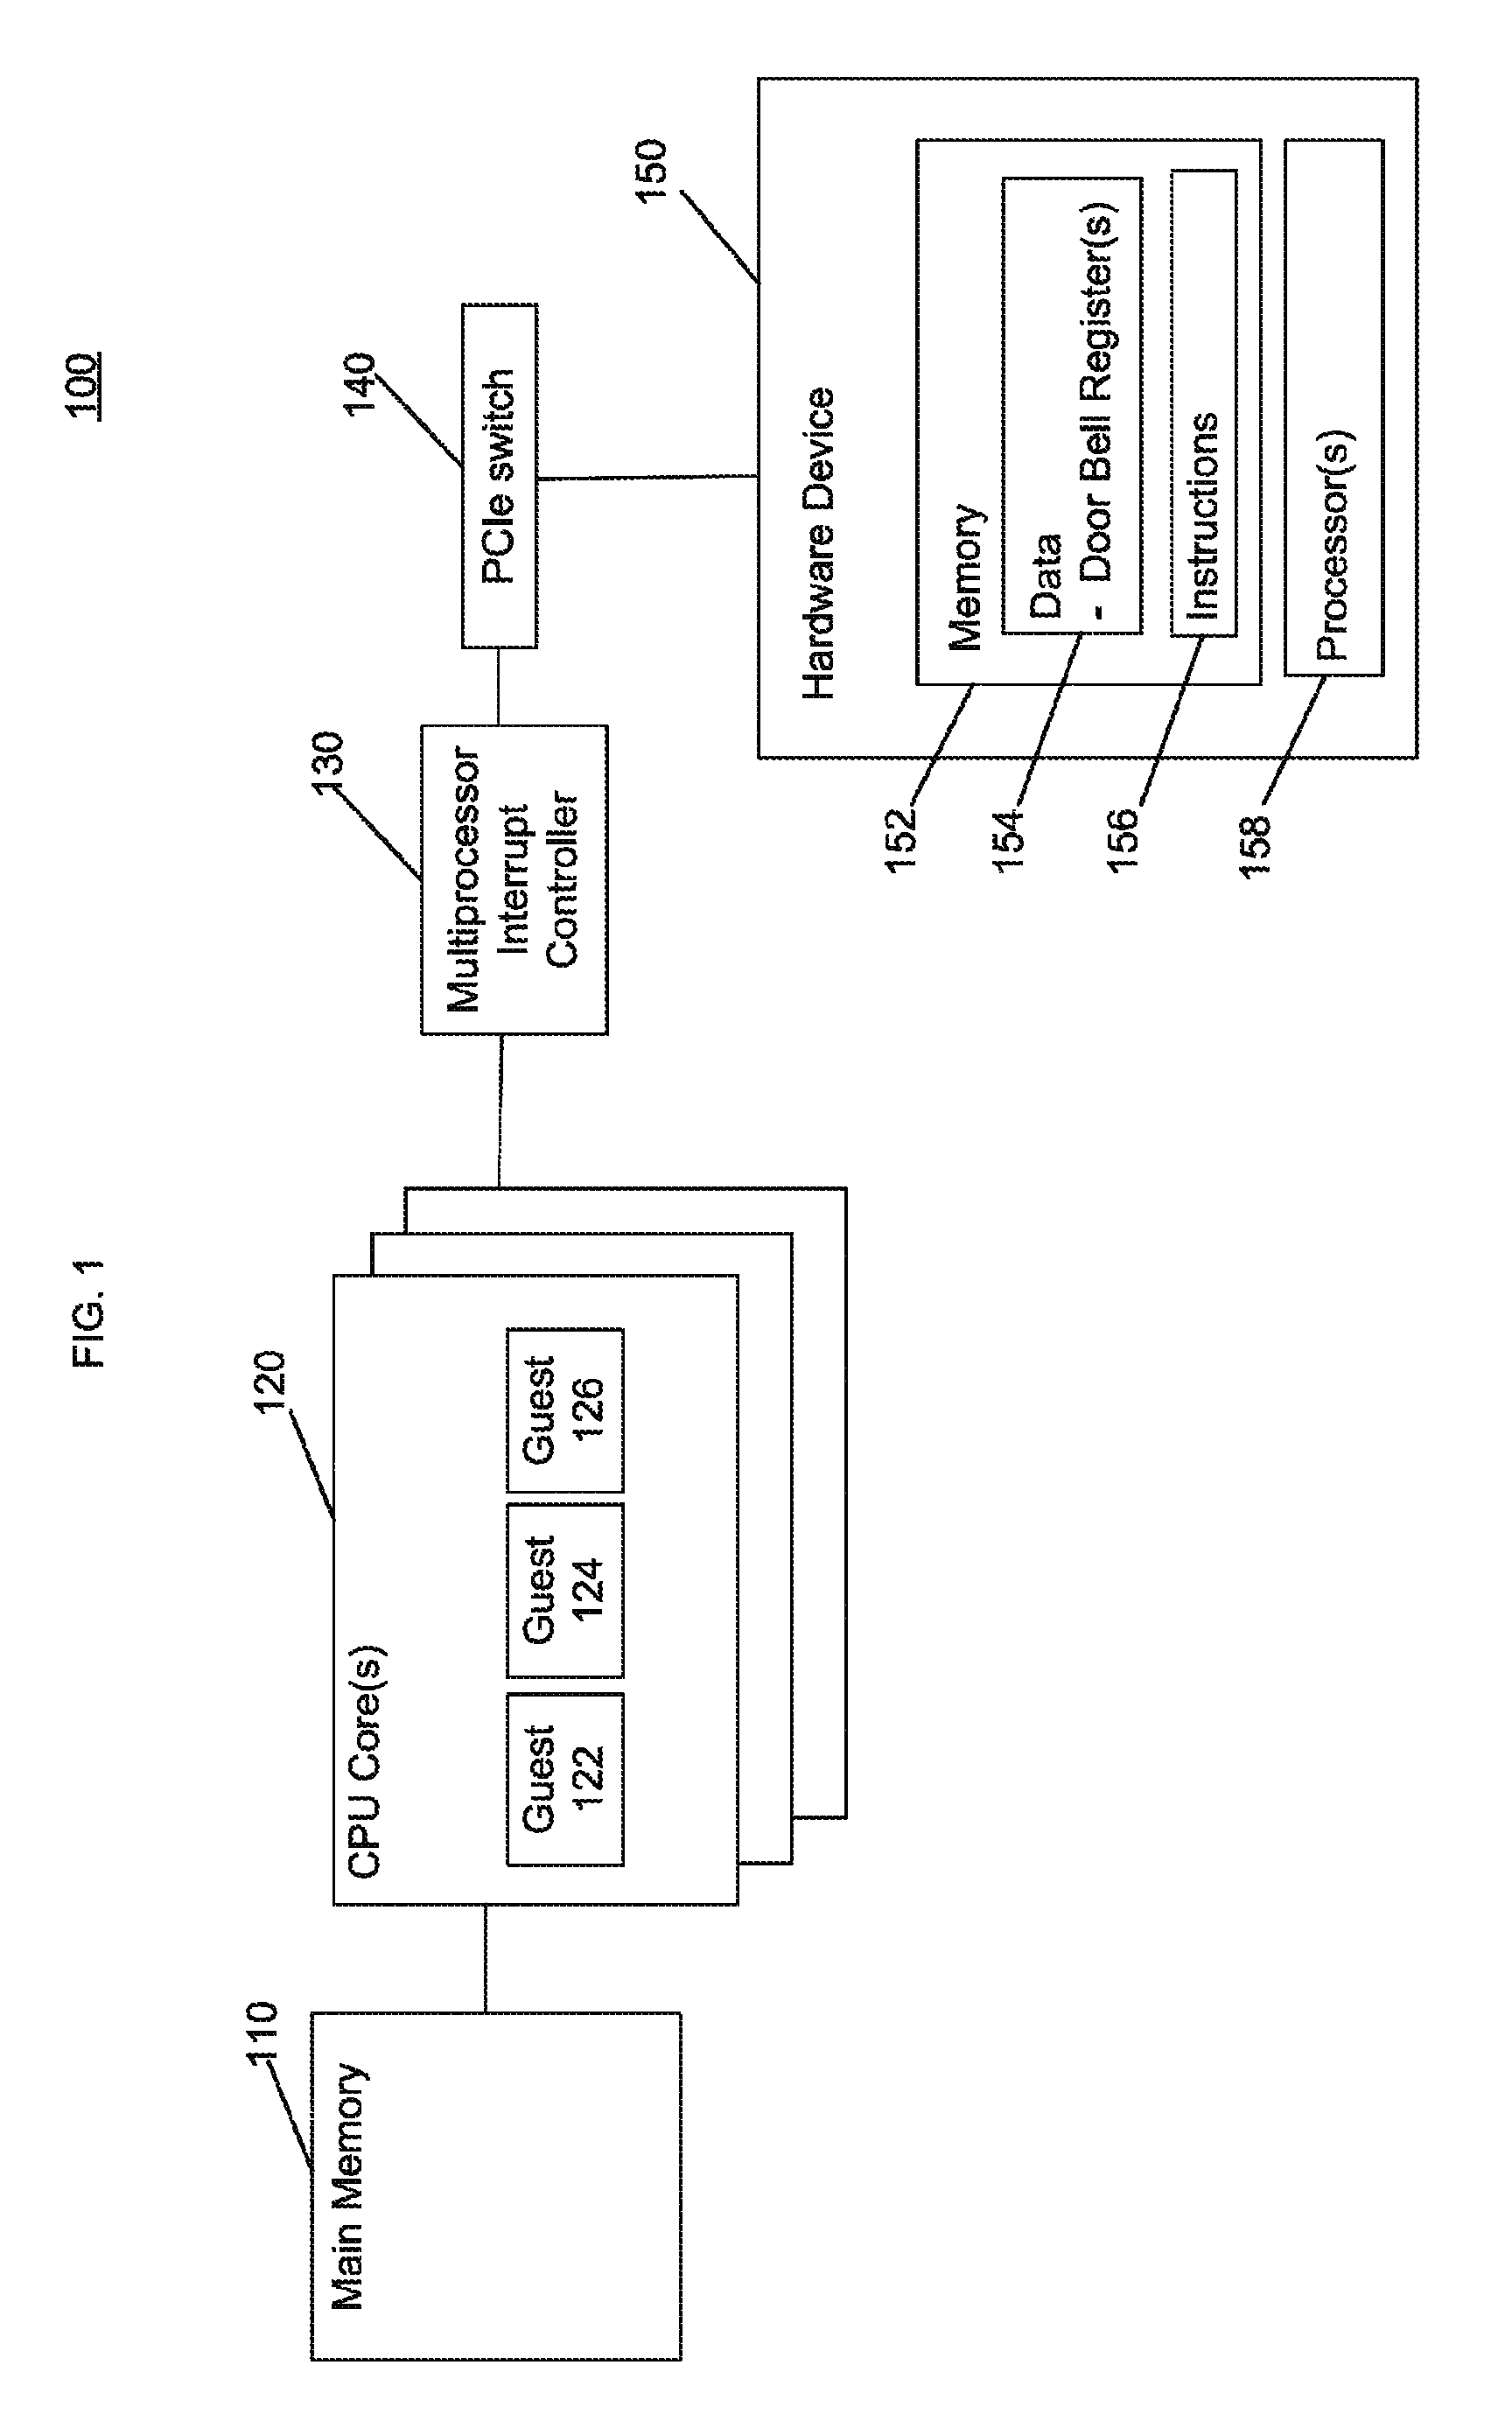 OS bypass inter-processor interrupt delivery mechanism